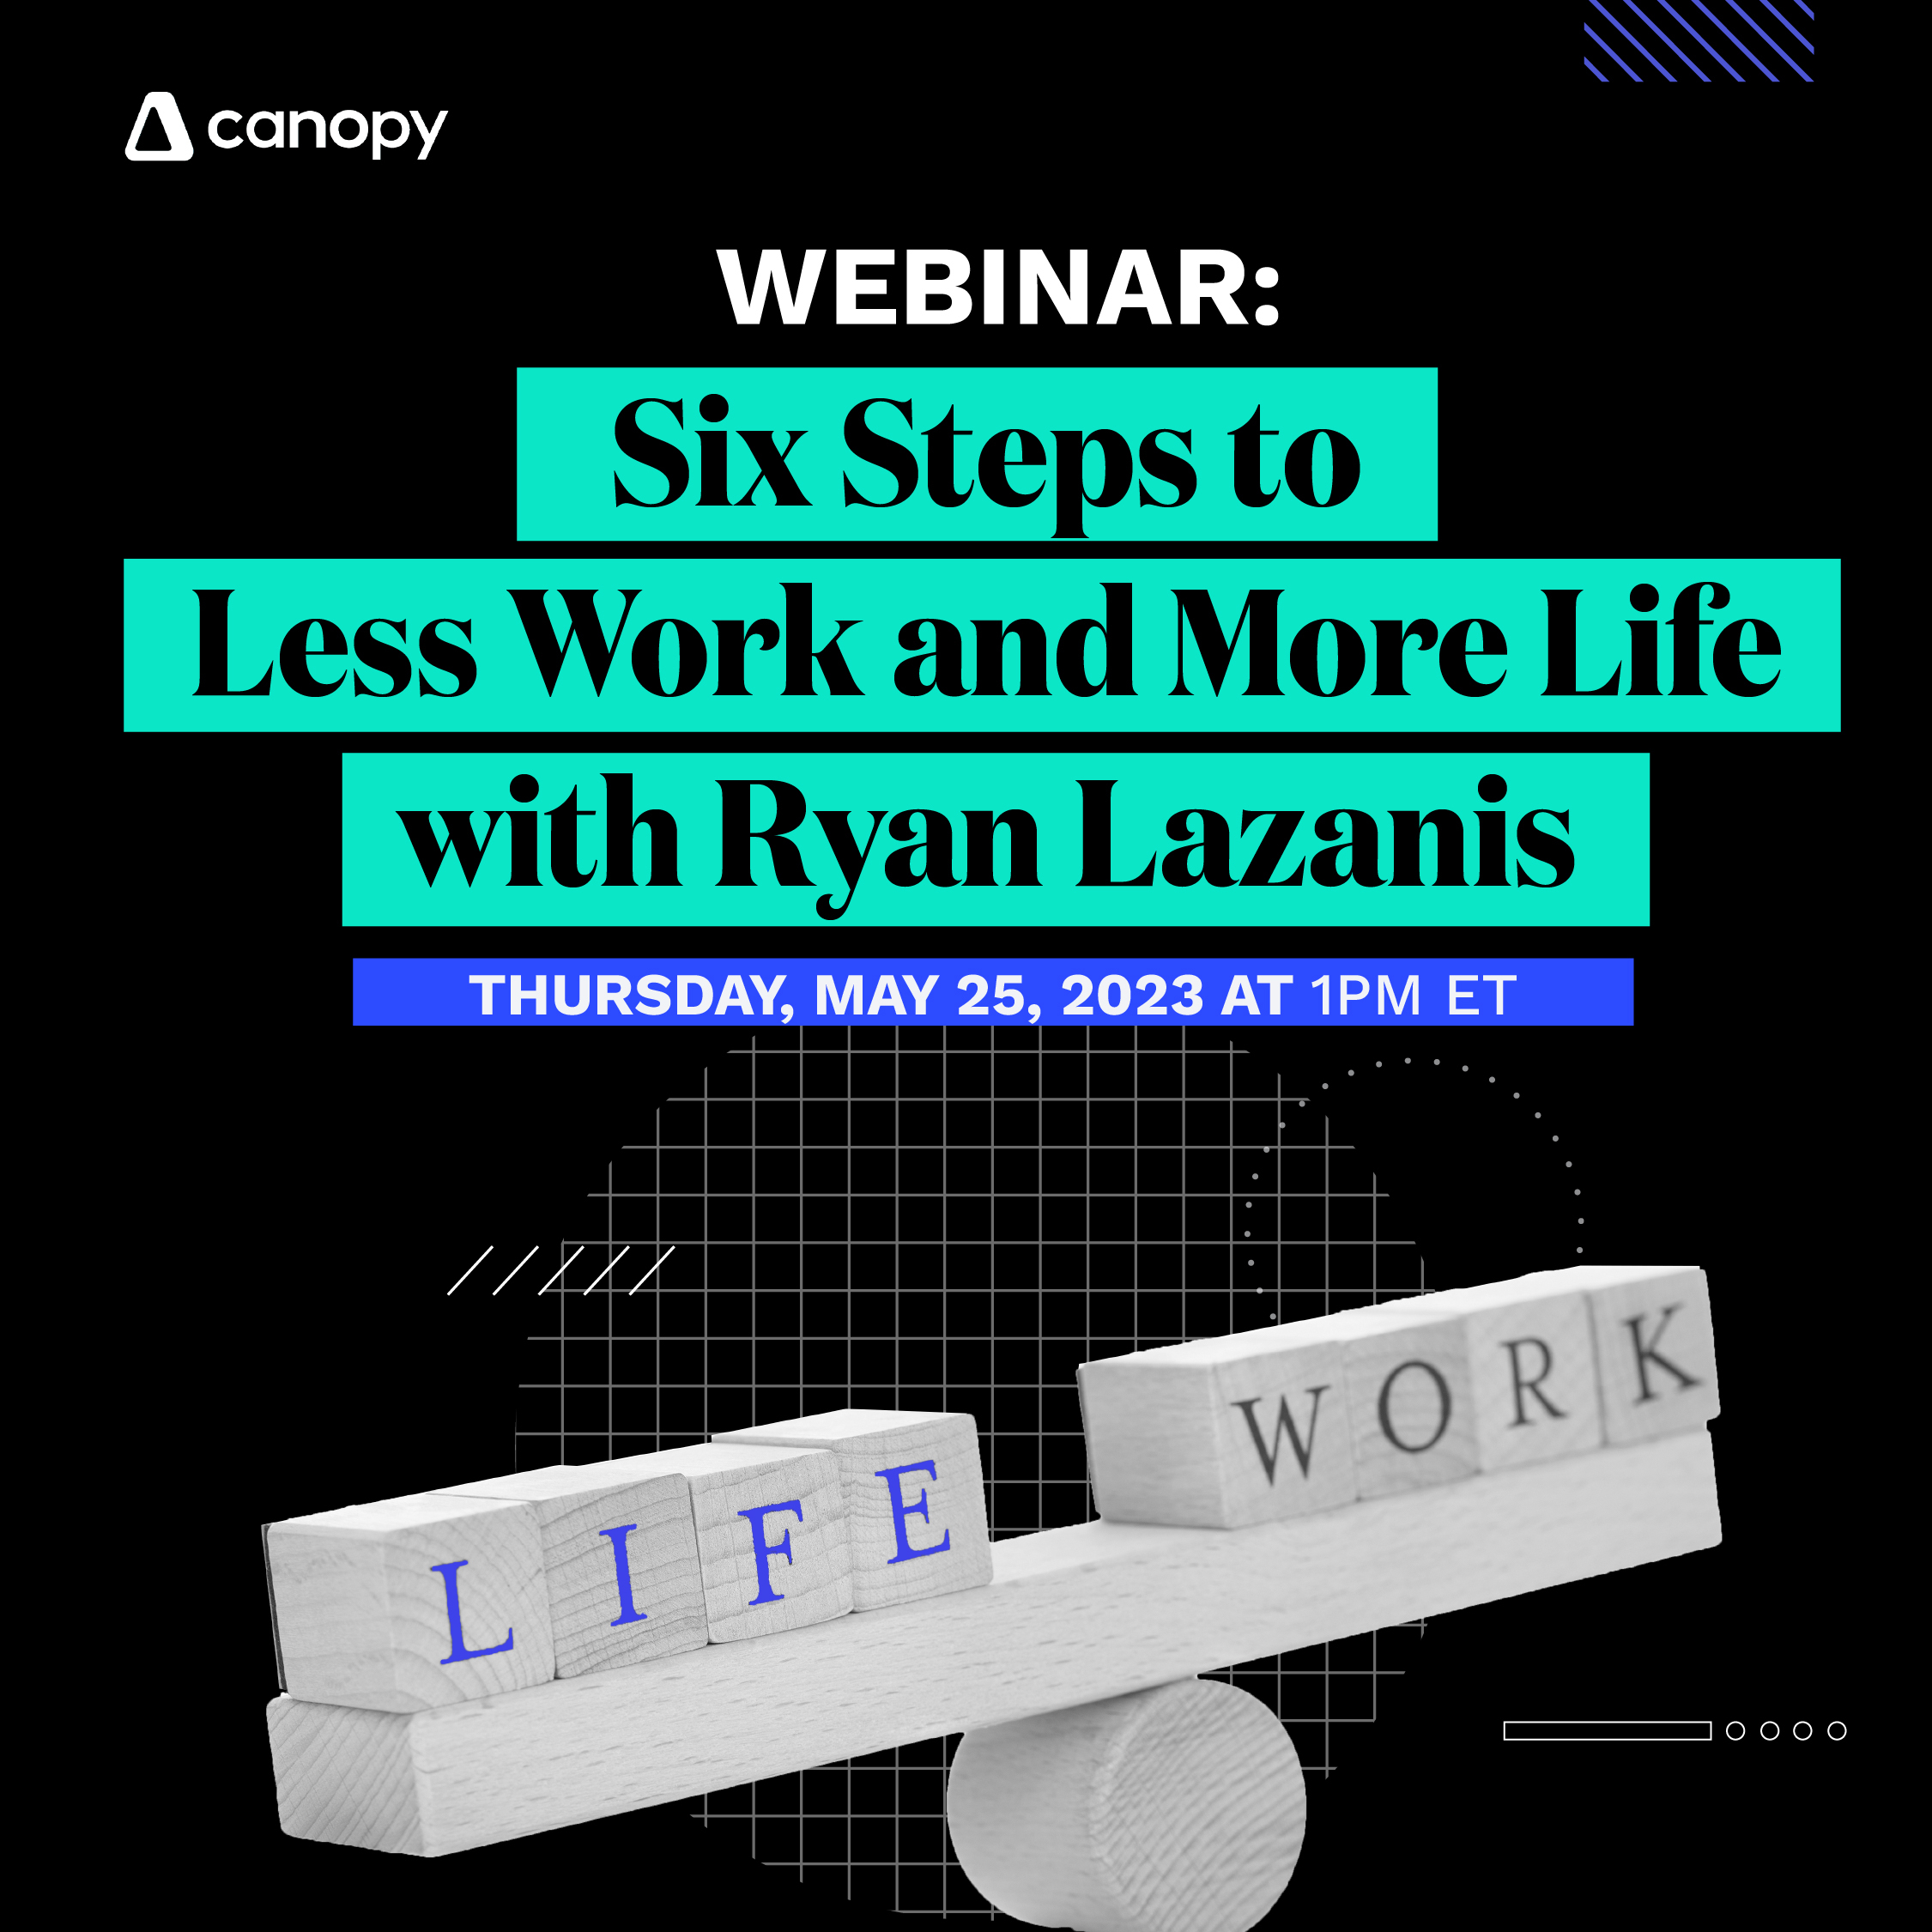 Six Steps to Less Work and More Life with Ryan Lazanis